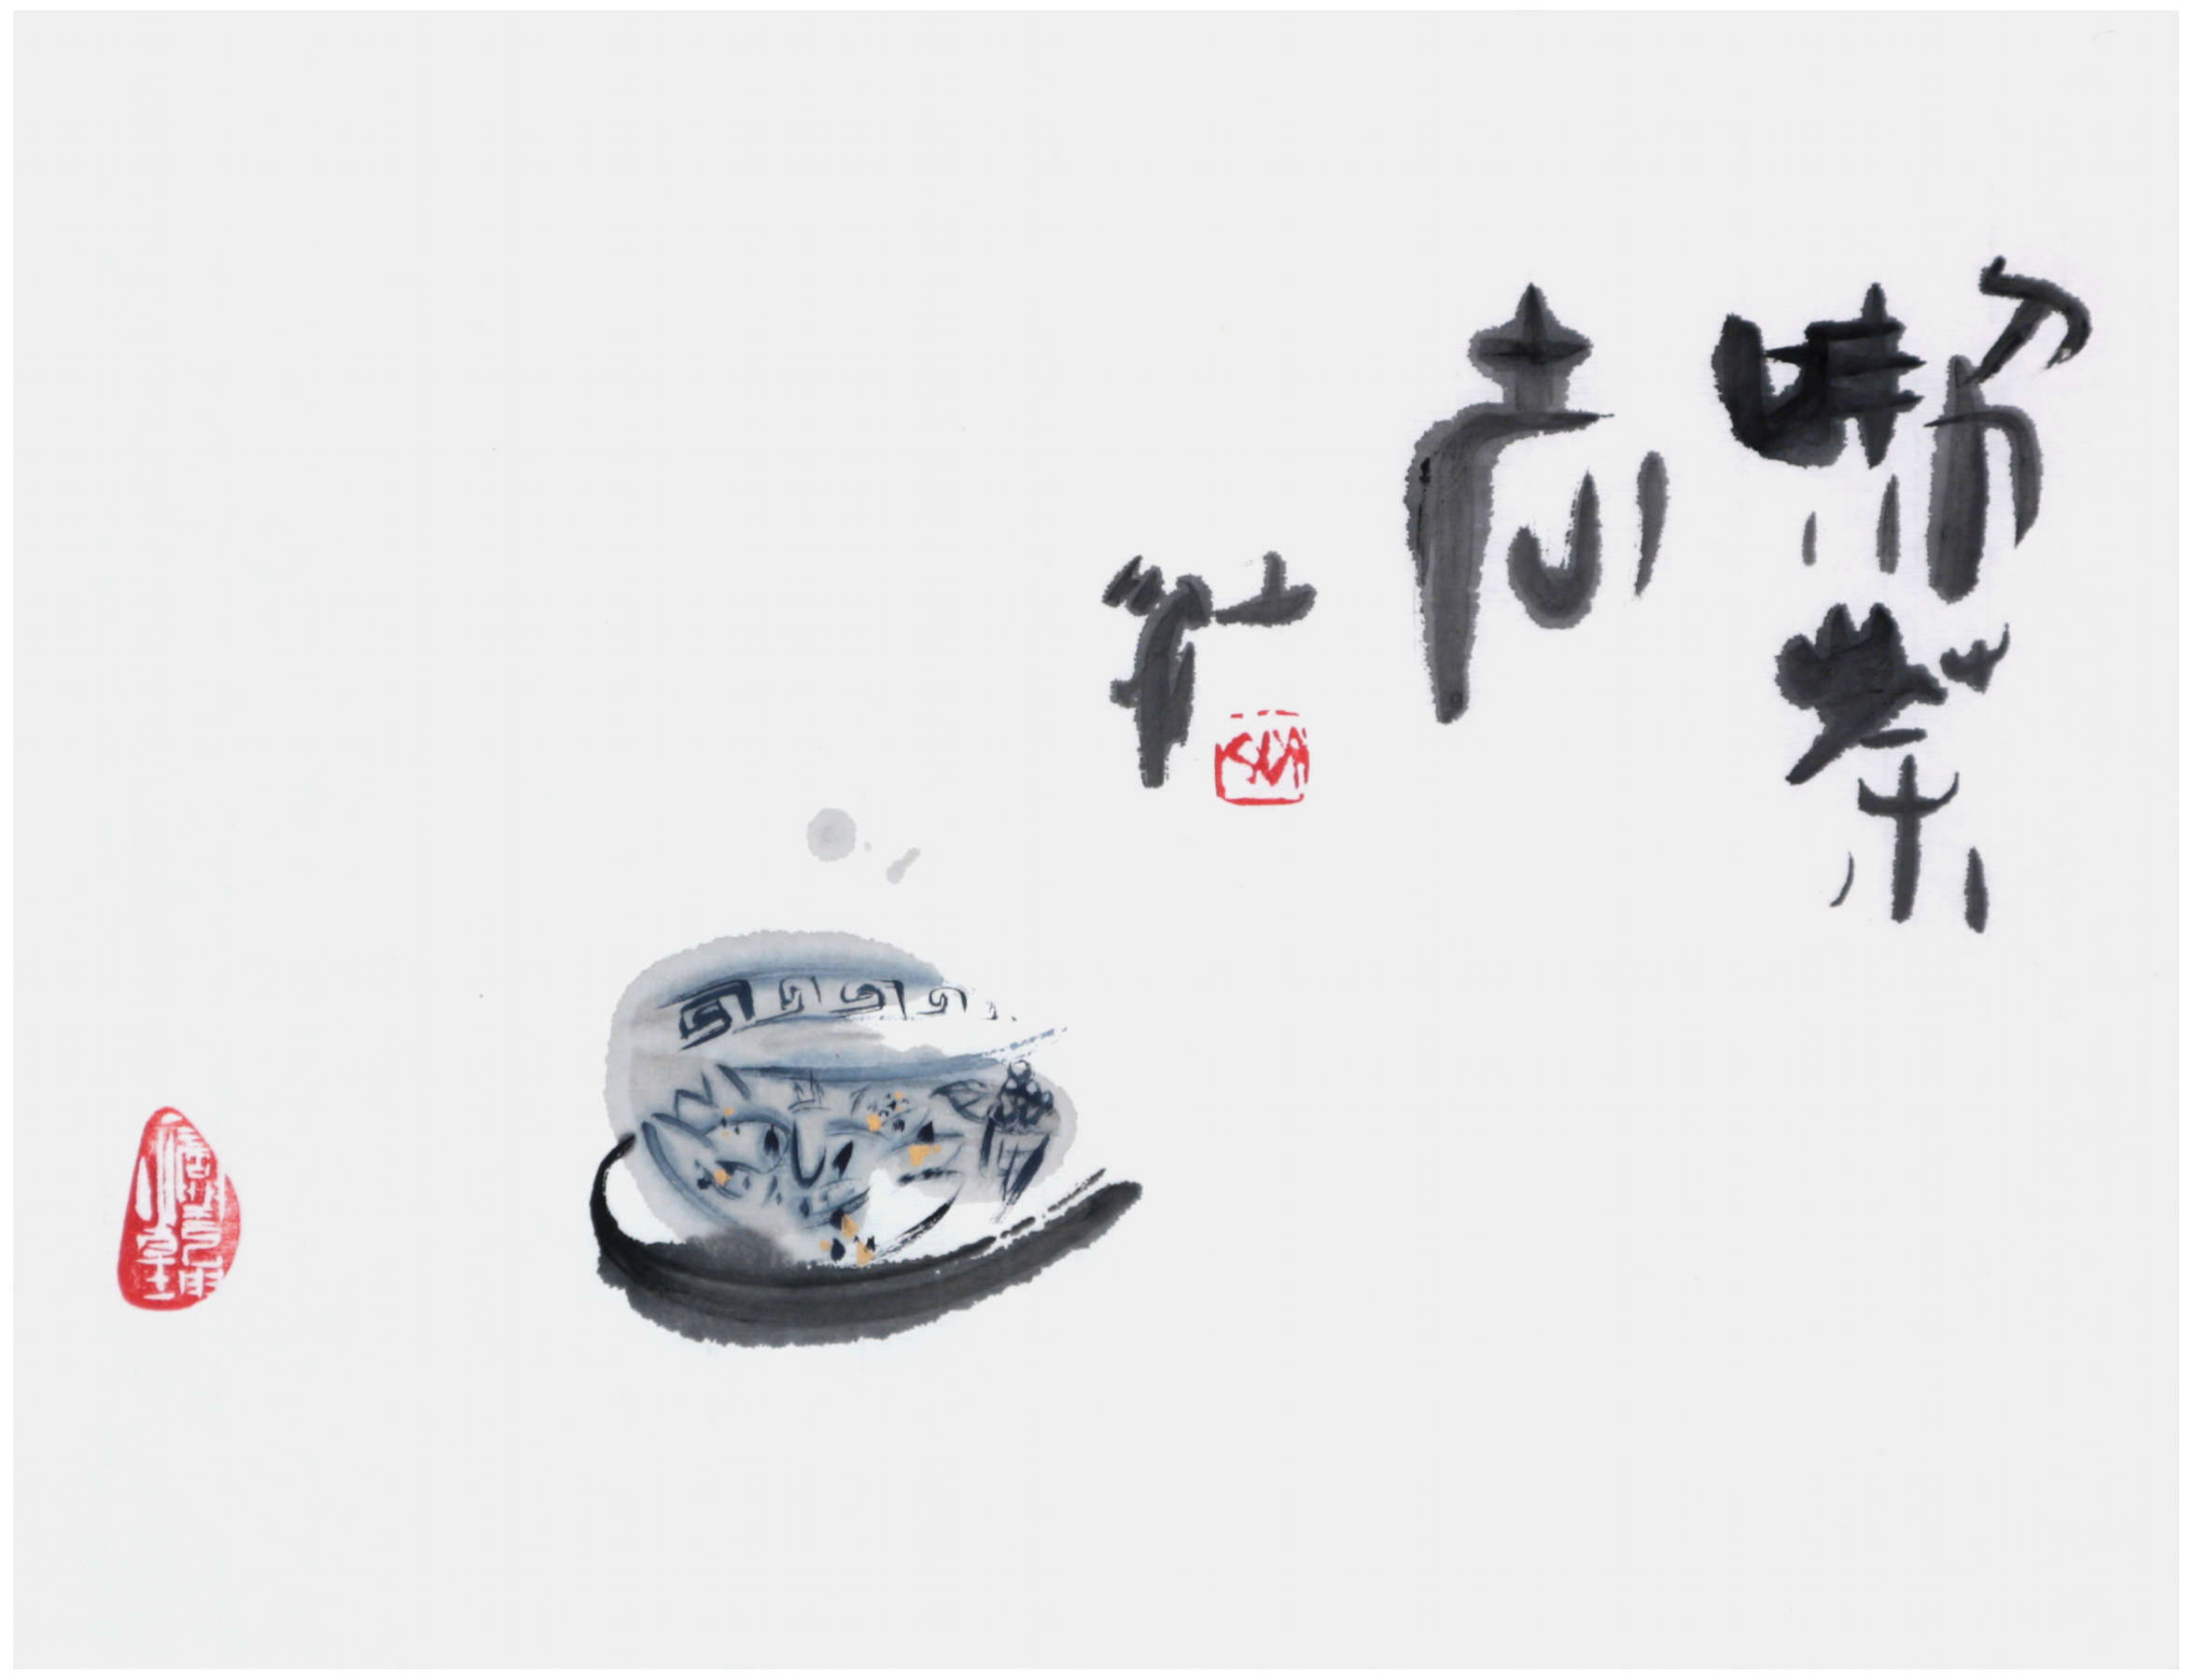 Sai Koh (Qi Hong)’s freehand brushwork Chinese painting (aka, still life painting,  literati painting,  ink wash painting, ink painting, ink brush painting): A Cup of Tea, 46×34cm, ink & color on Mian Liao Mian Lian Xuan paper